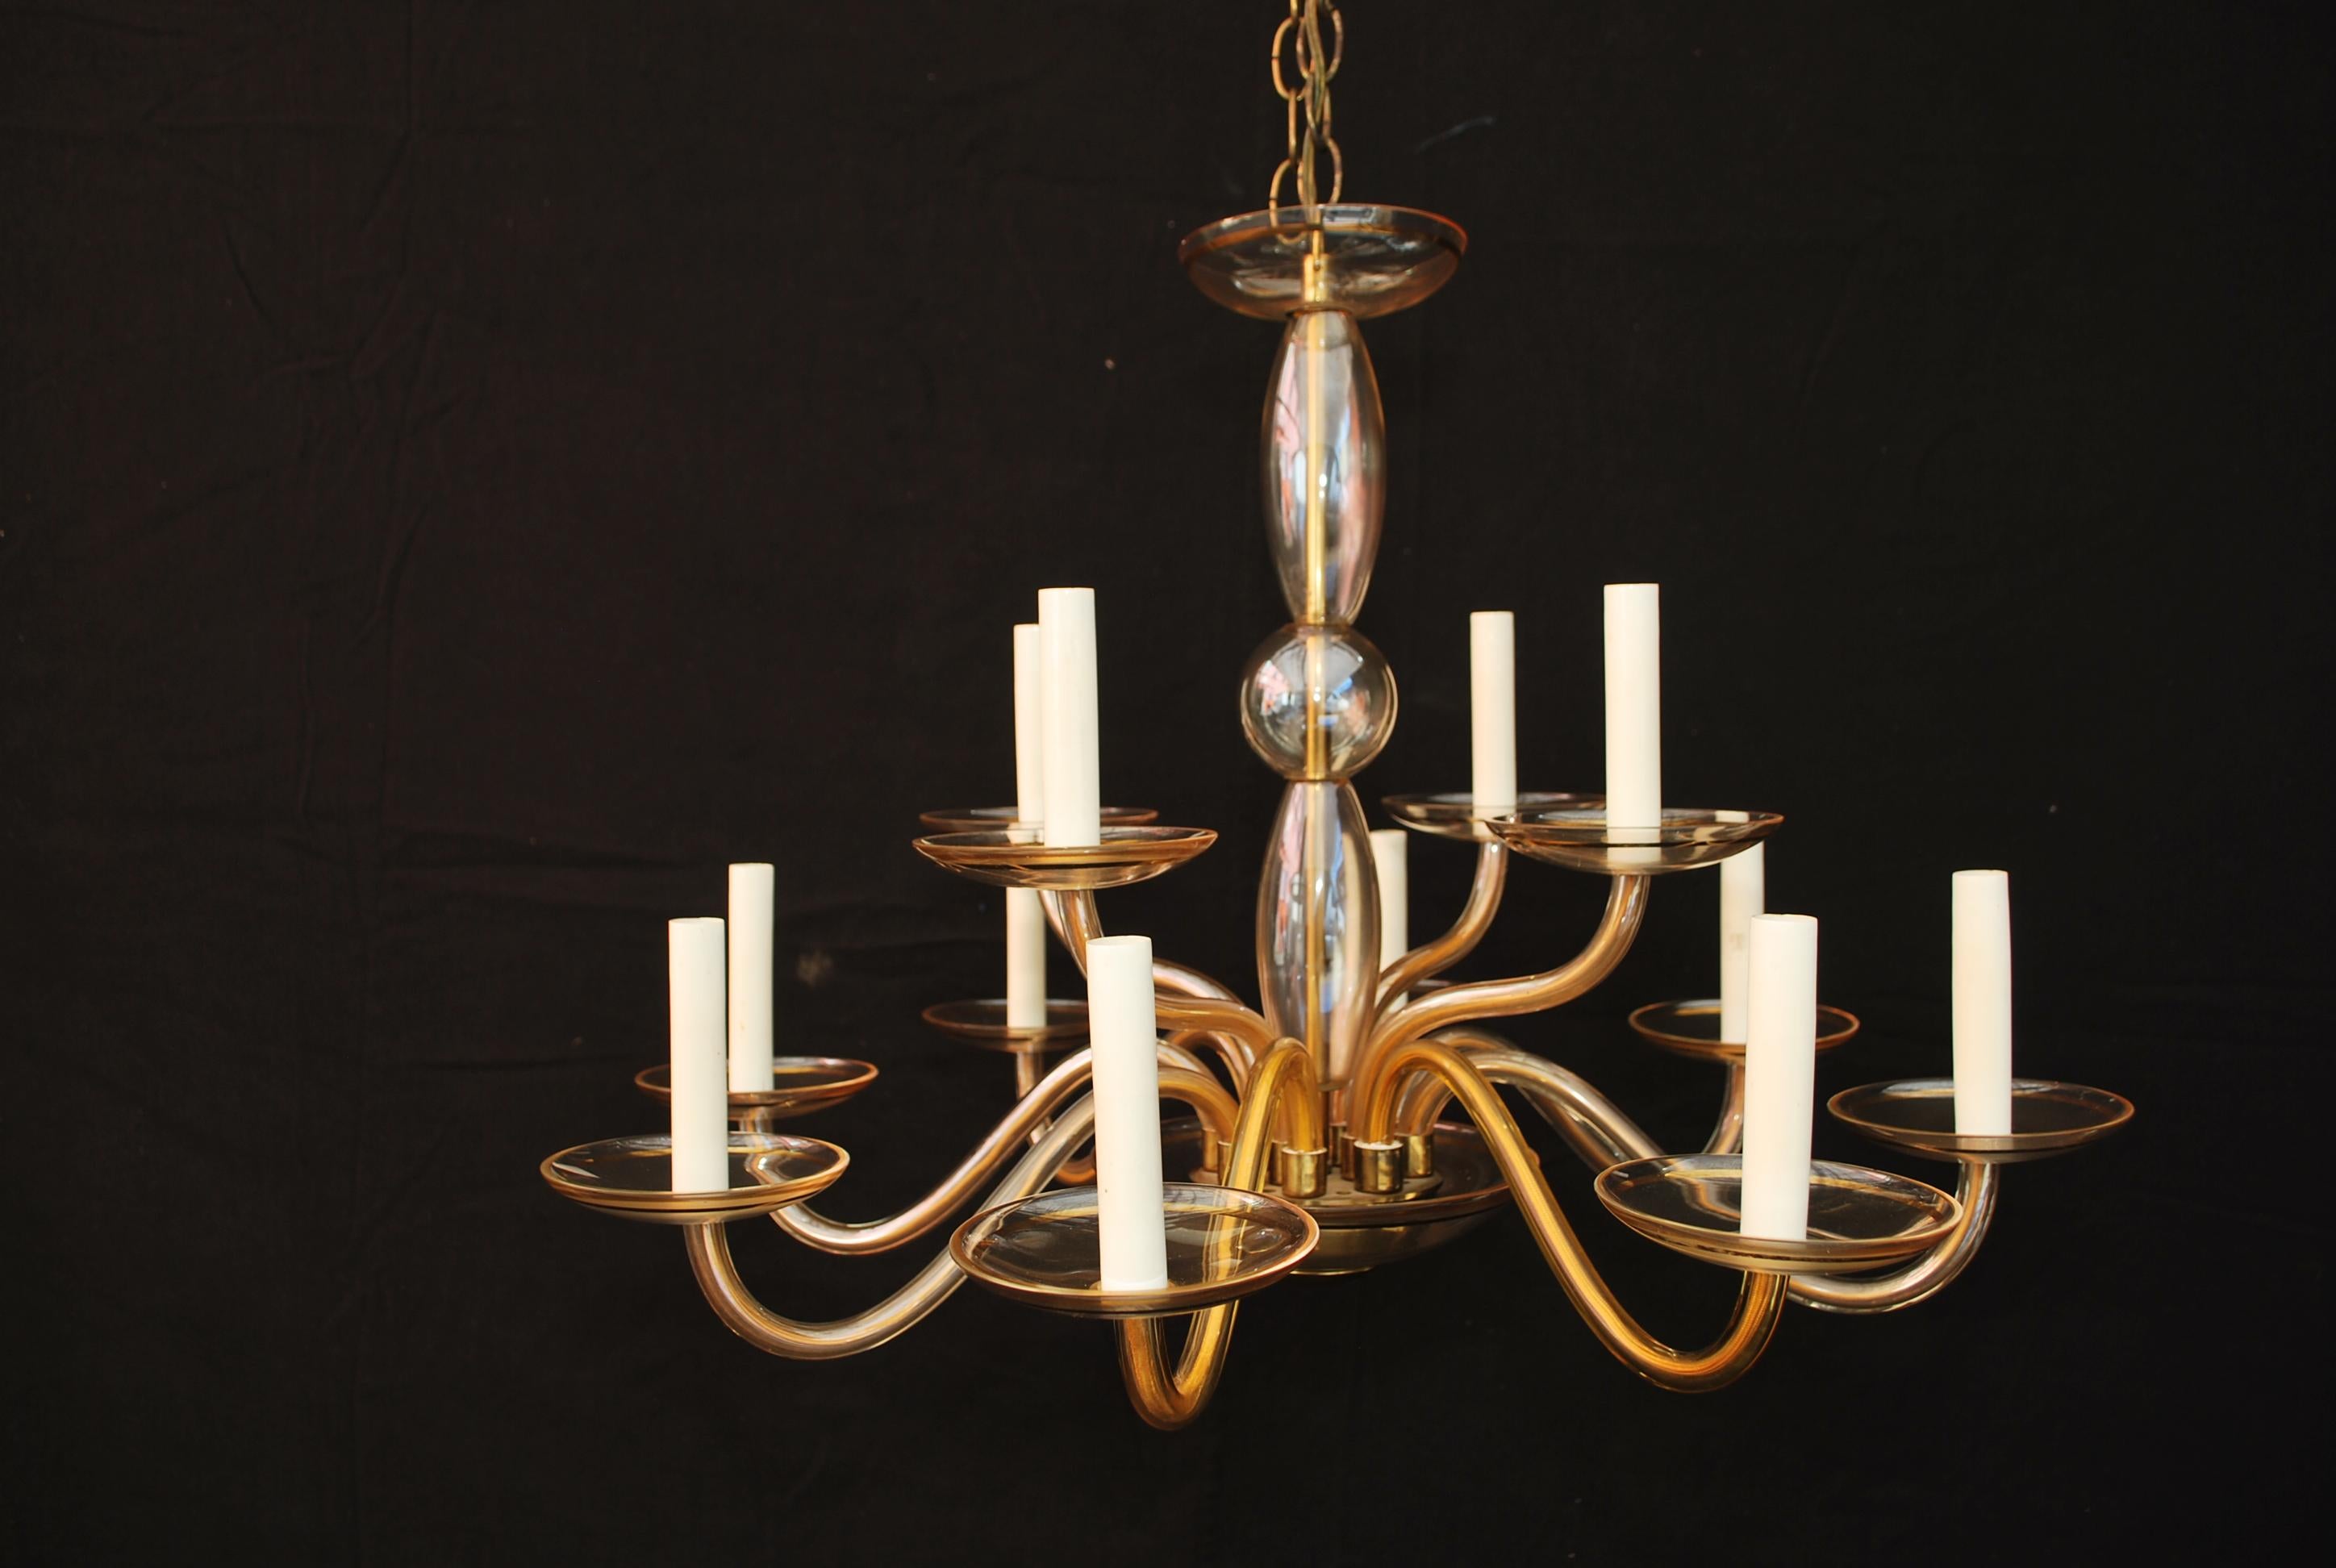 A beautiful and elegant 1950's Murano glass chandelier , the color of the glass is so much nicer in person